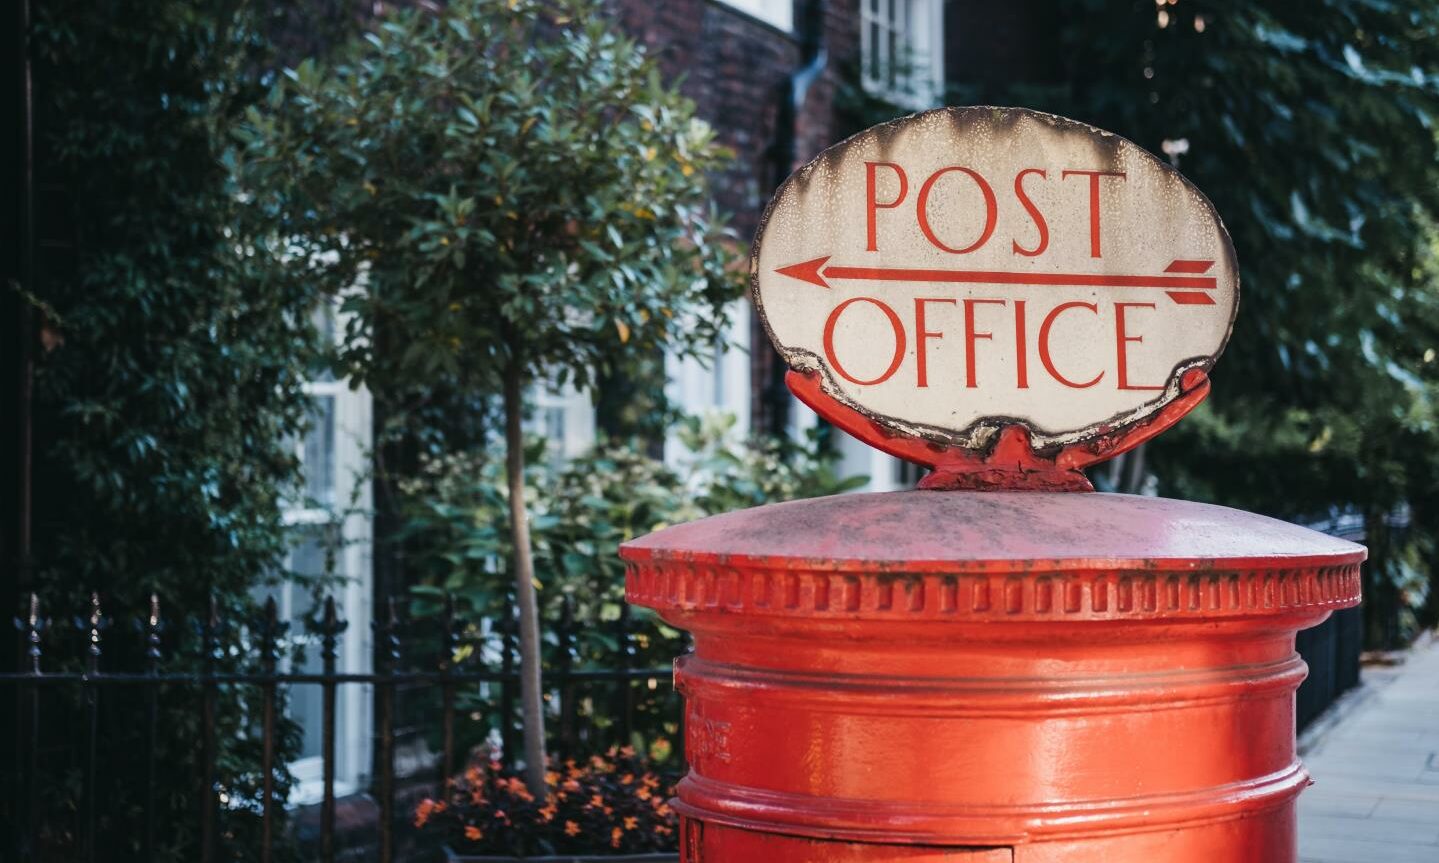 The concept of post offices goes as far back as Oliver Cromwell, but they are still very much a modern necessity (Photo: Alena Veasey/Shutterstock)